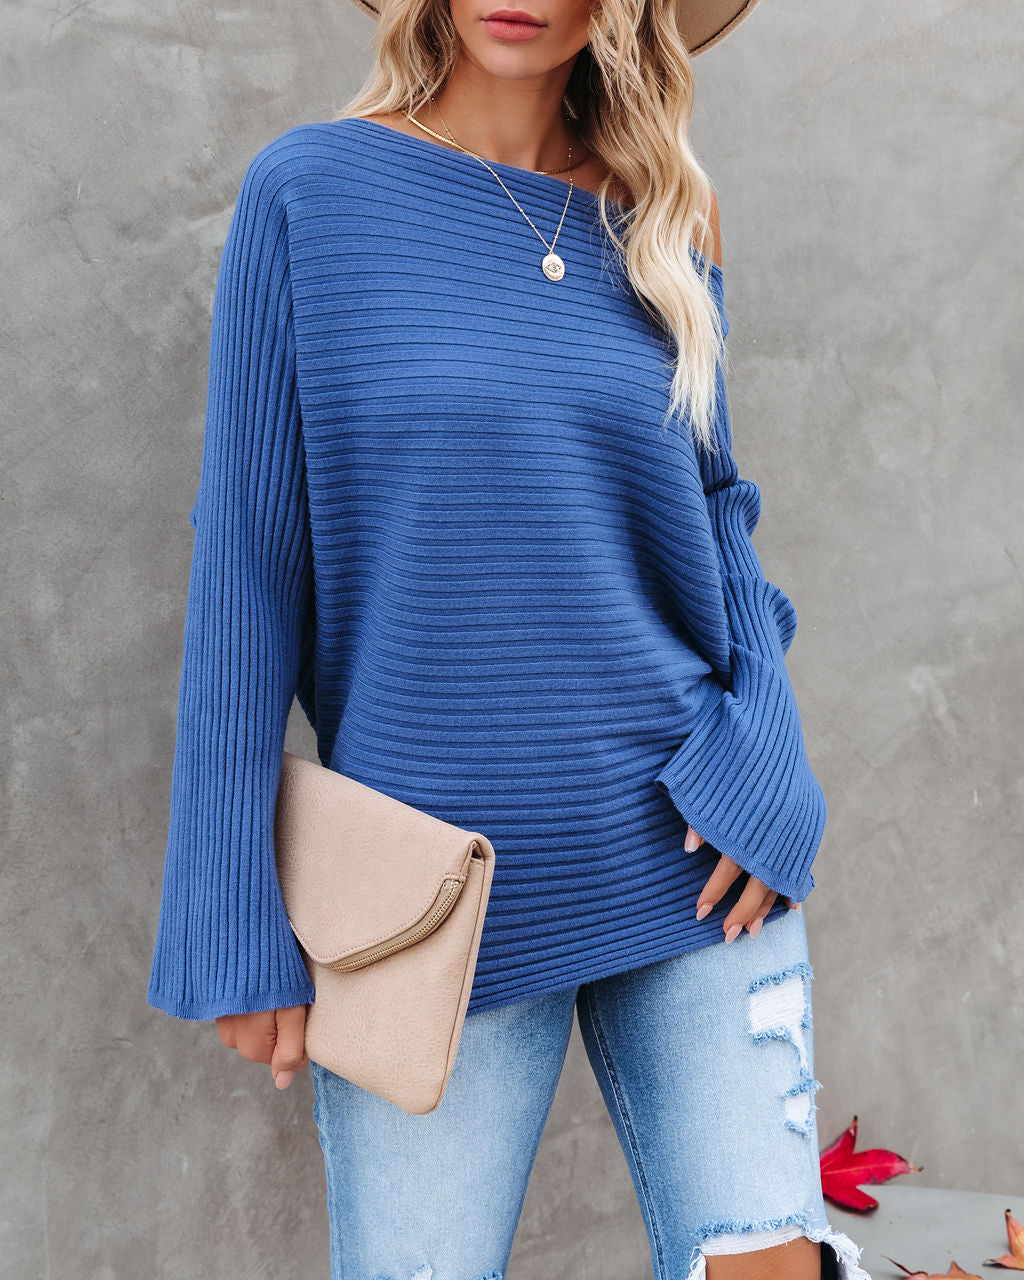 This Time Around Ribbed Dolman Sweater - Cobalt Blue